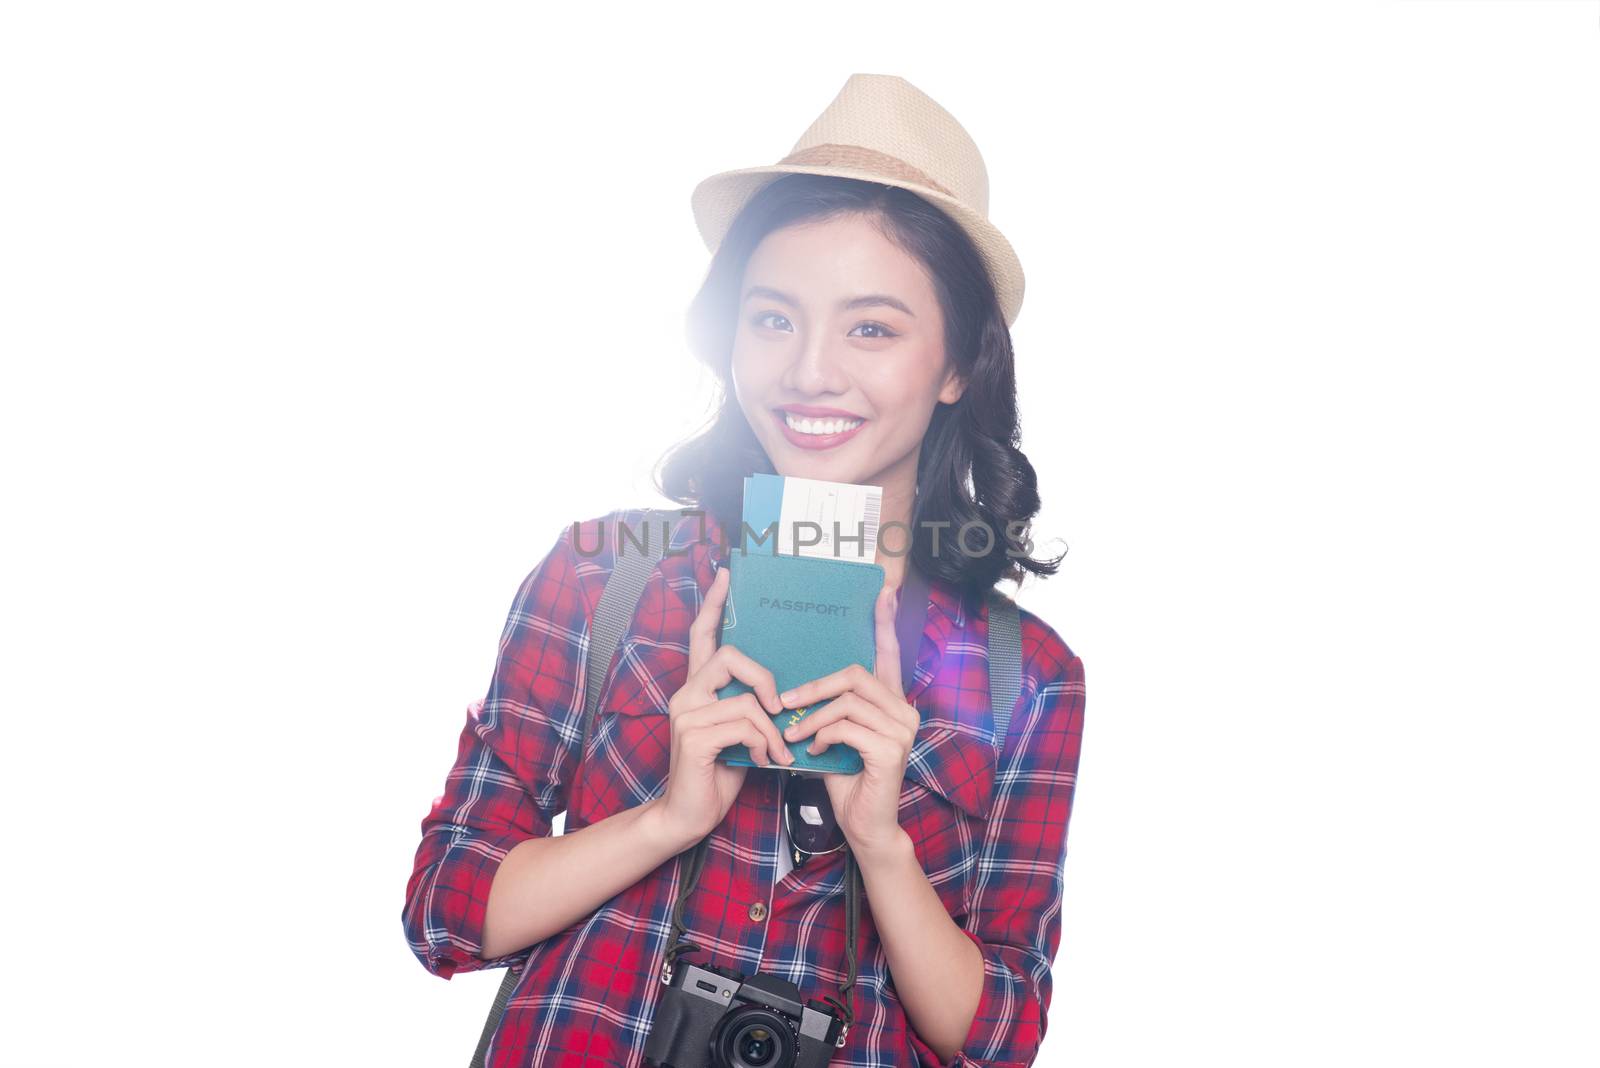 Woman travel. Young beautiful asian woman traveler holding passport and air ticket standing over white.